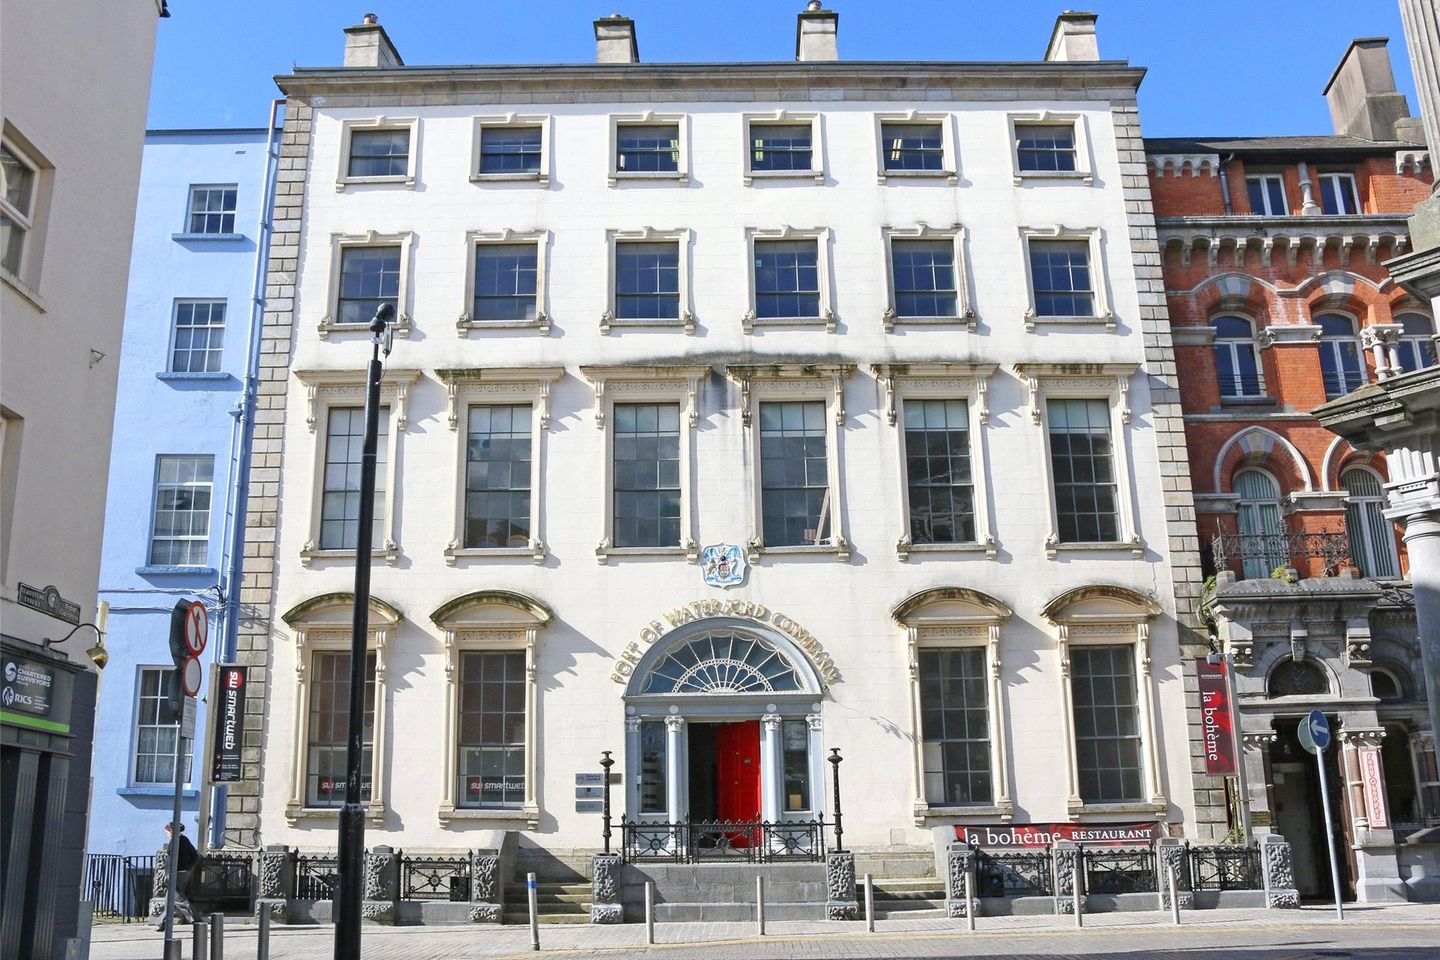 The Port Of Waterford Building, 2 Georges St, Waterford